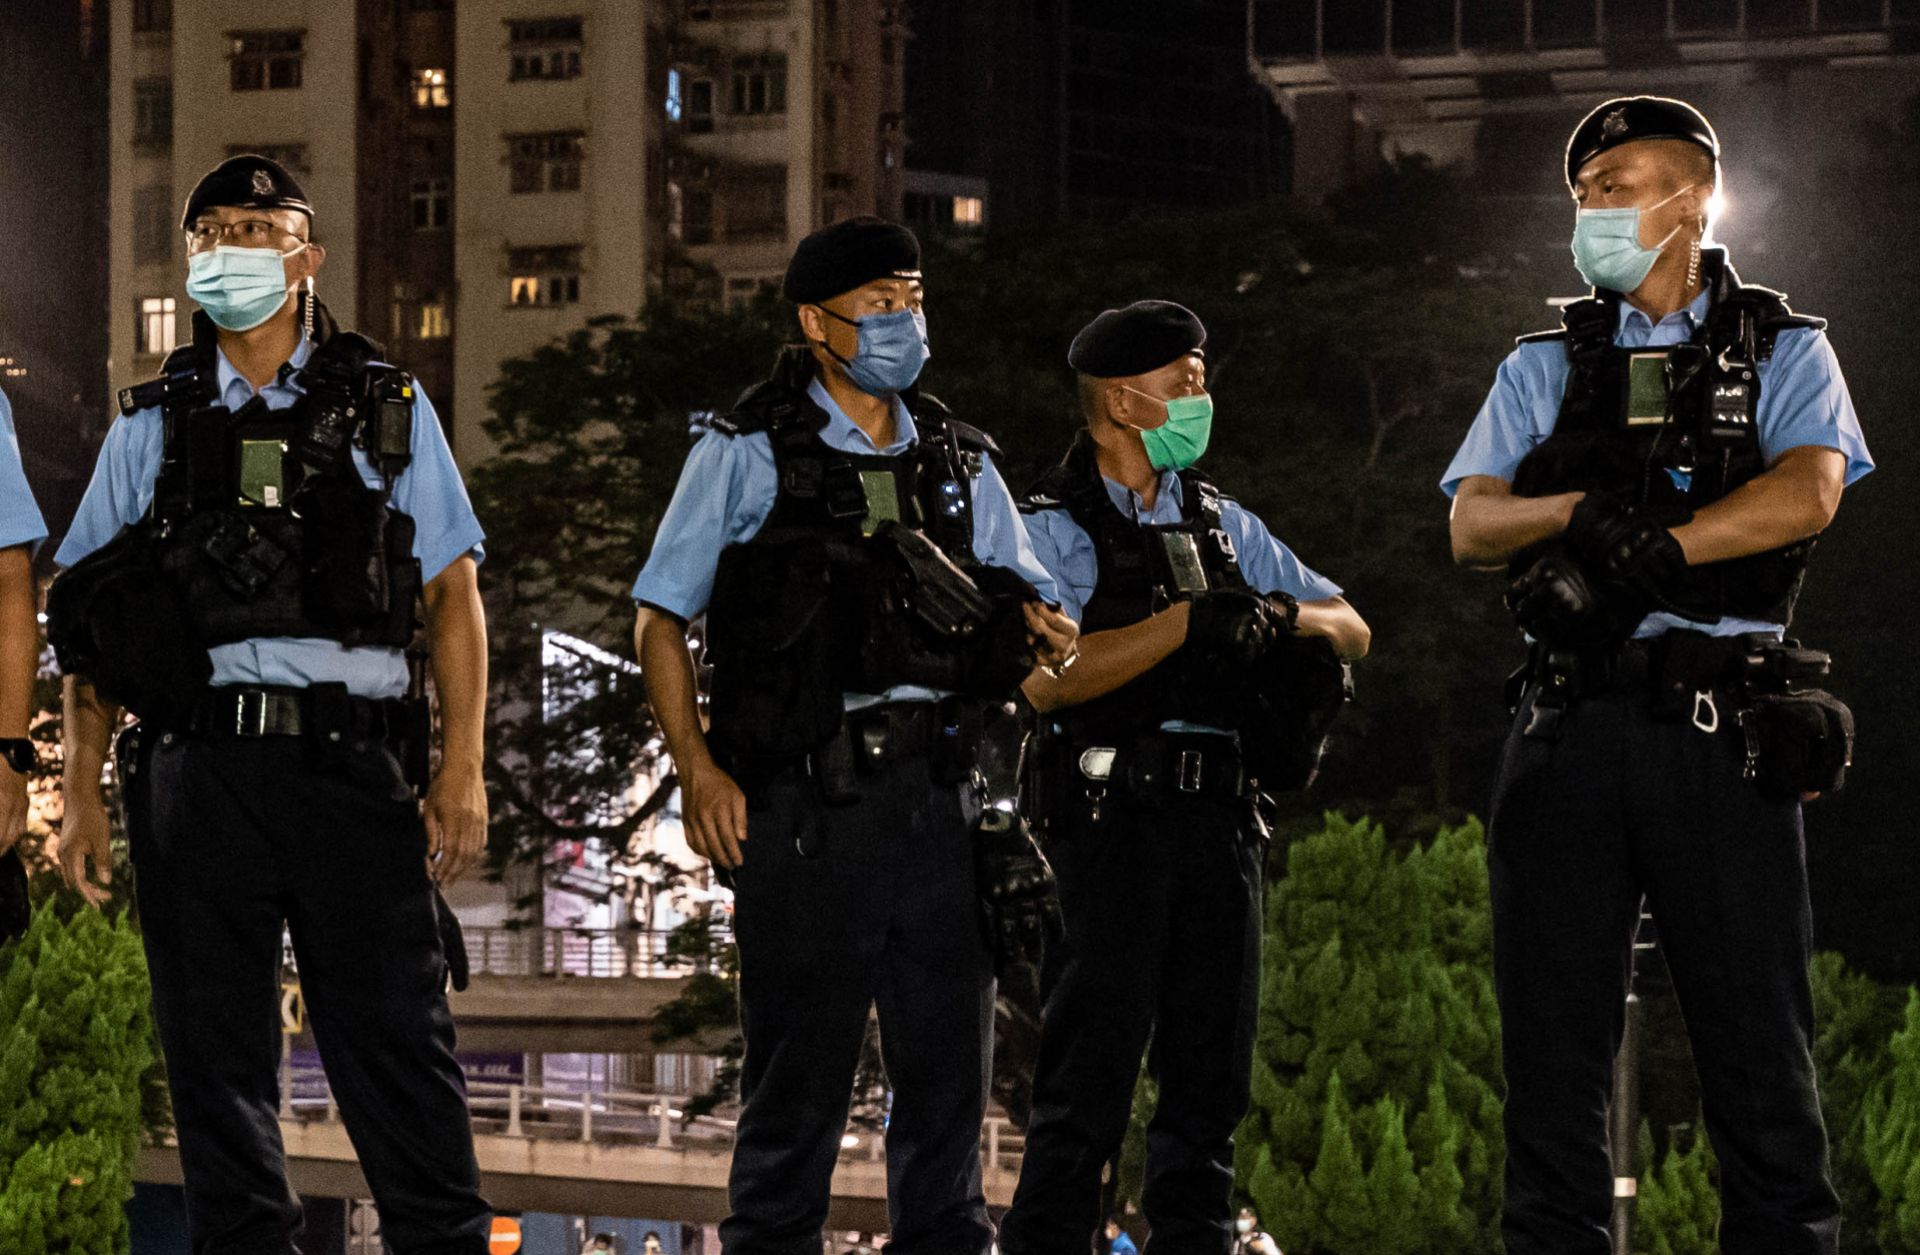 Police officers set up a cordon as they disperse the public out of Victoria Park ahead of the 33rd anniversary of the Tiananmen Square incident on June 3, 2022, in Hong Kong, China. 